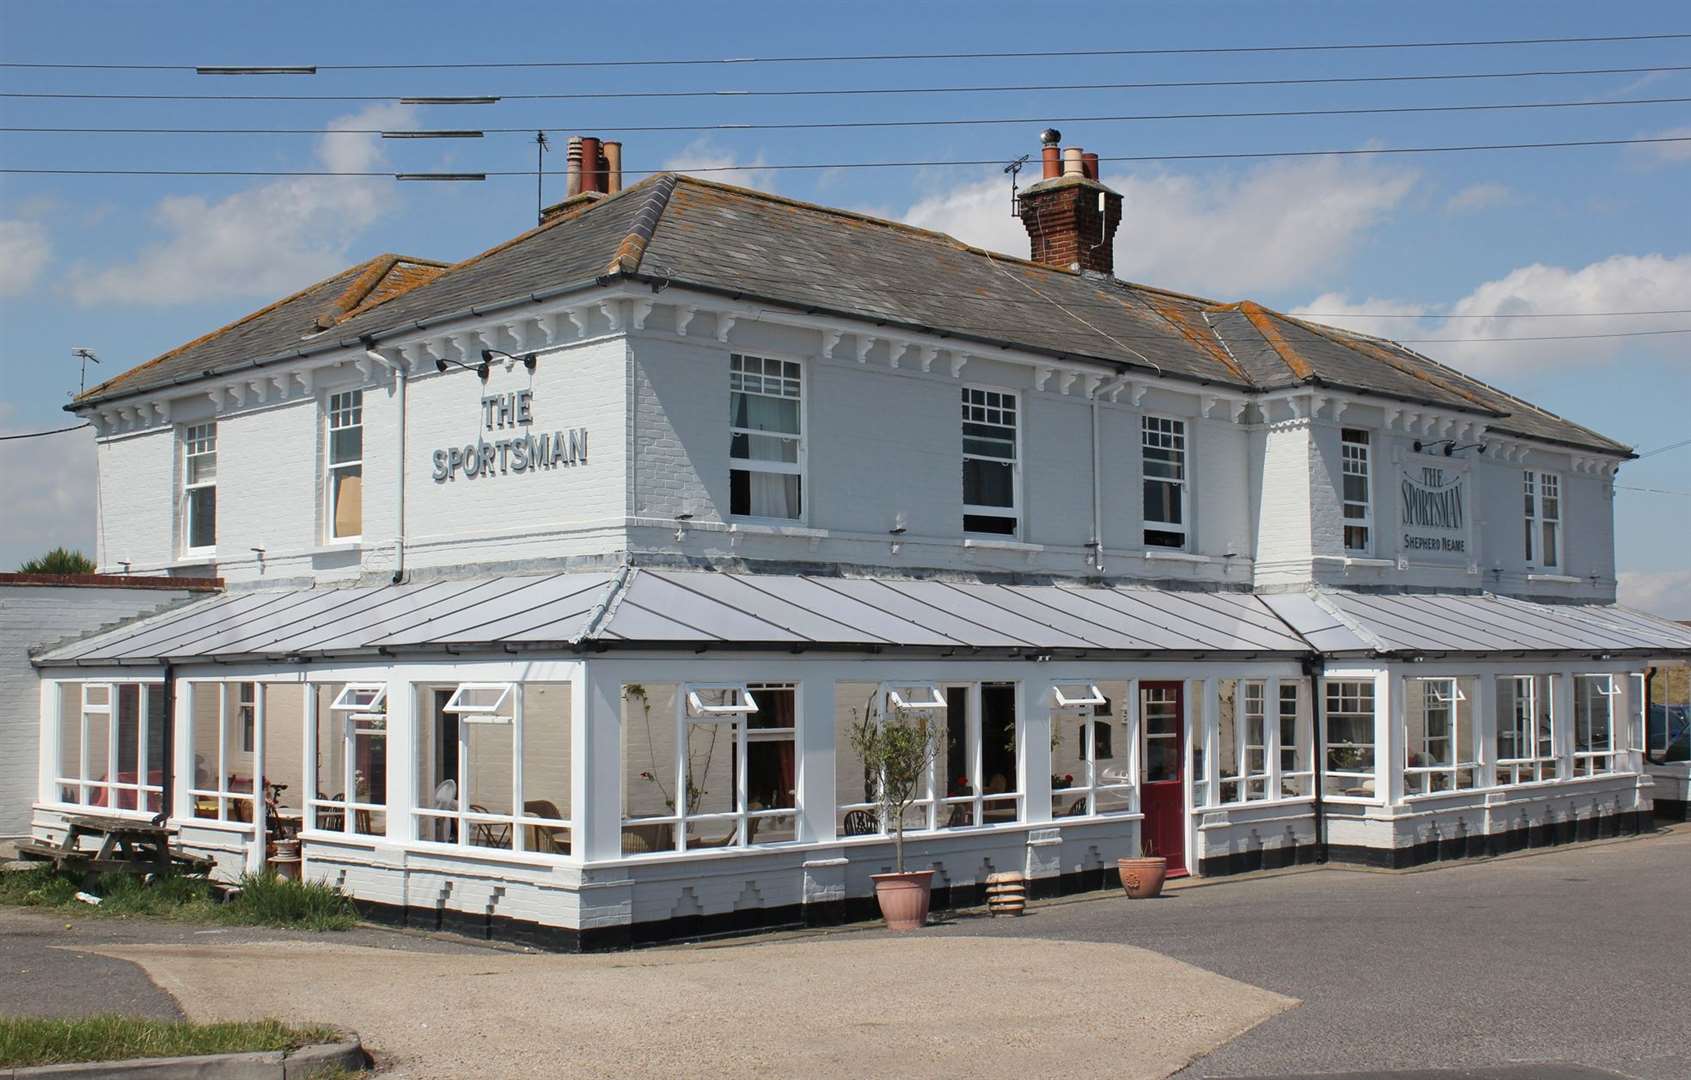 The Sportsman in Whitstable was among the restaurants with rooms praised. Picture: Mark Anthony Fox